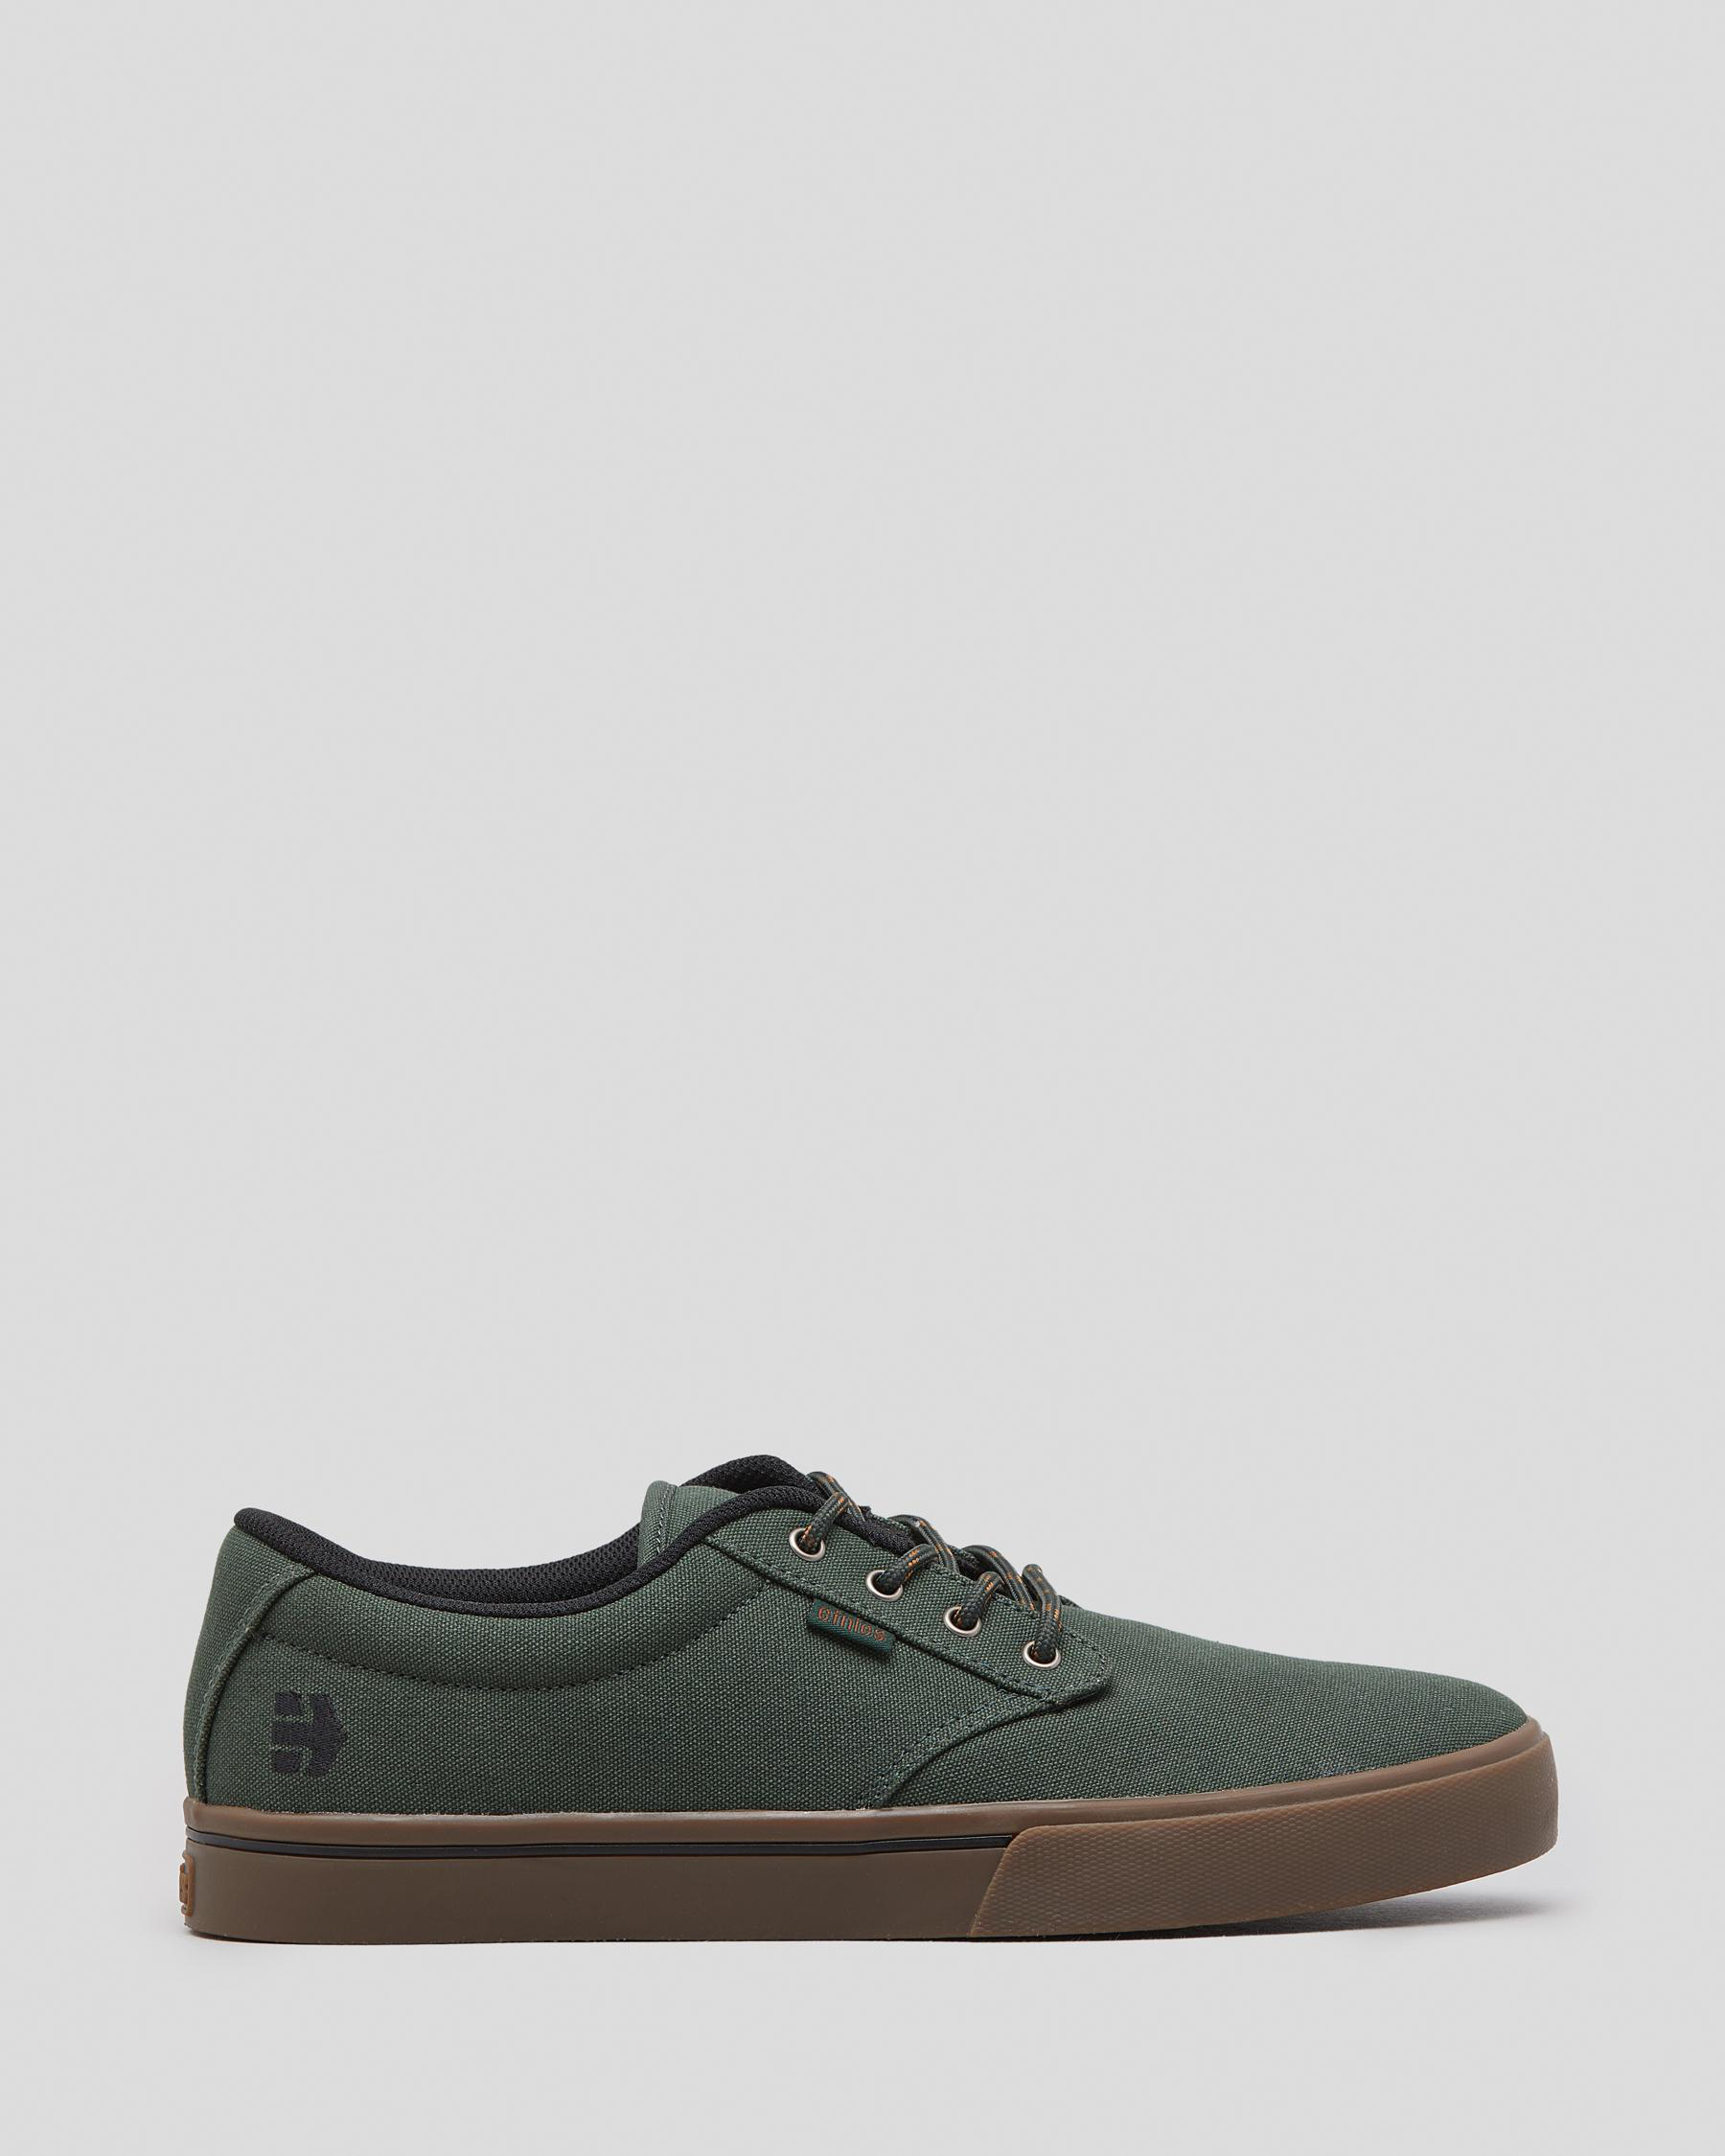 Shop Etnies Jameson 2 Shoes In Green/black - Fast Shipping & Easy ...